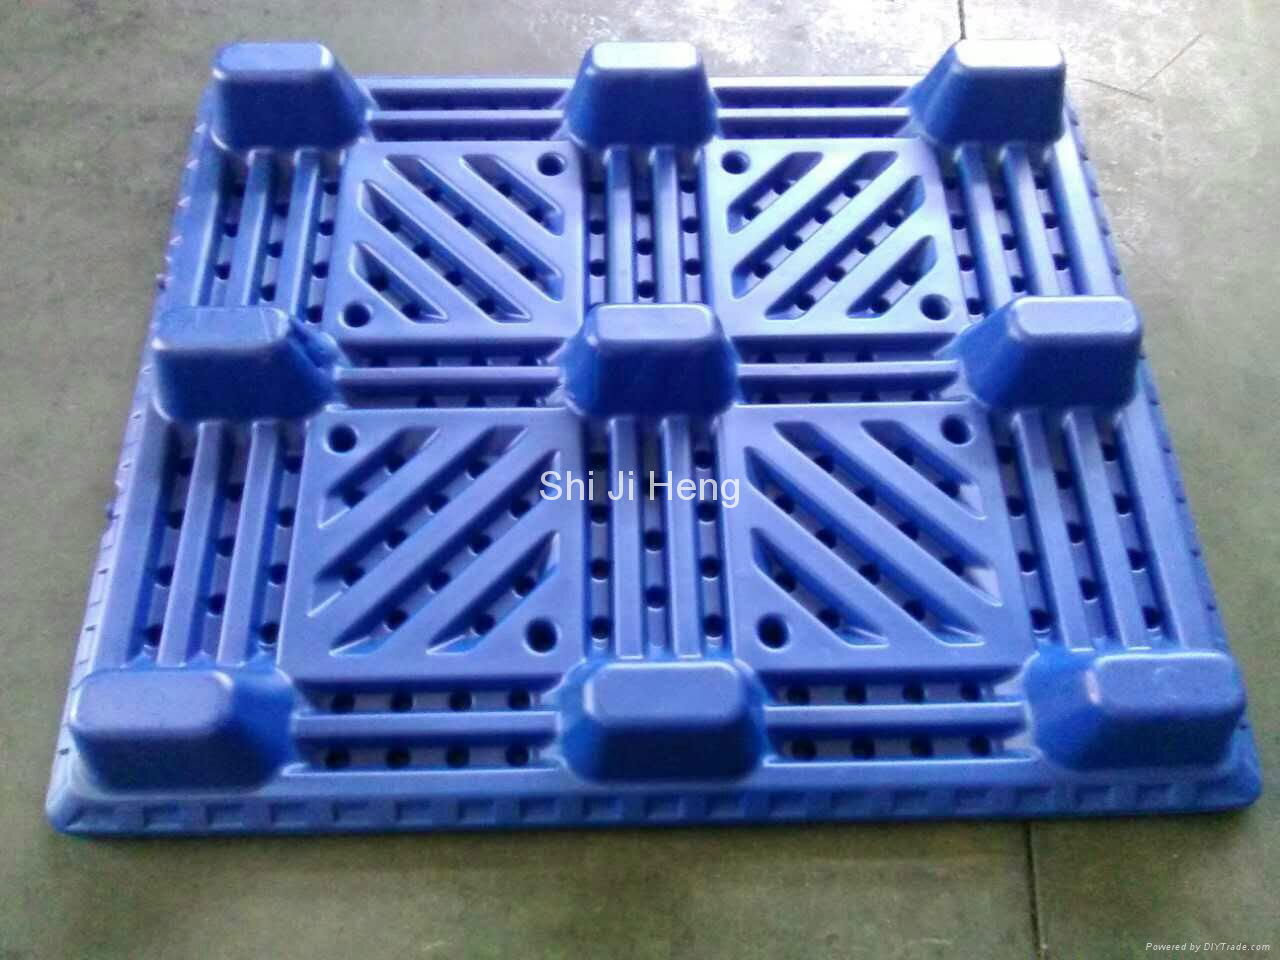 Light-Duty Euro Single Face Grid Pallet with 9 Feet